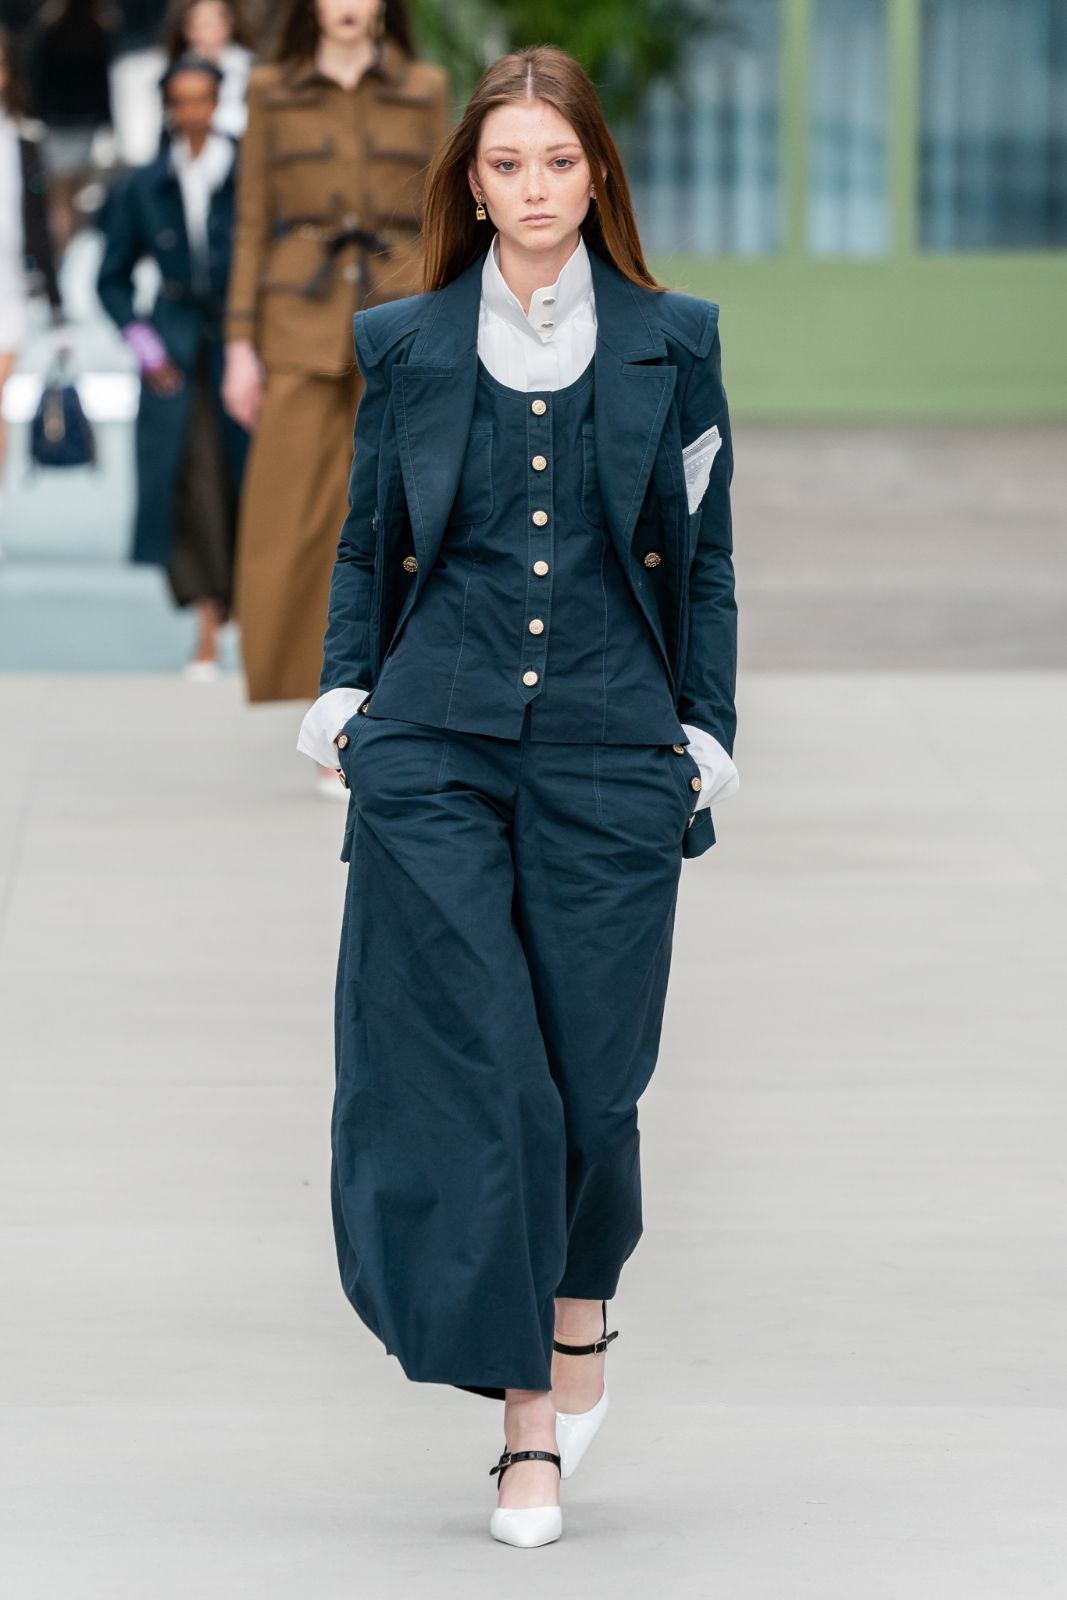 Chanel Debuts Virginie Viard’s First Solo Collection for Resort 2020 ...